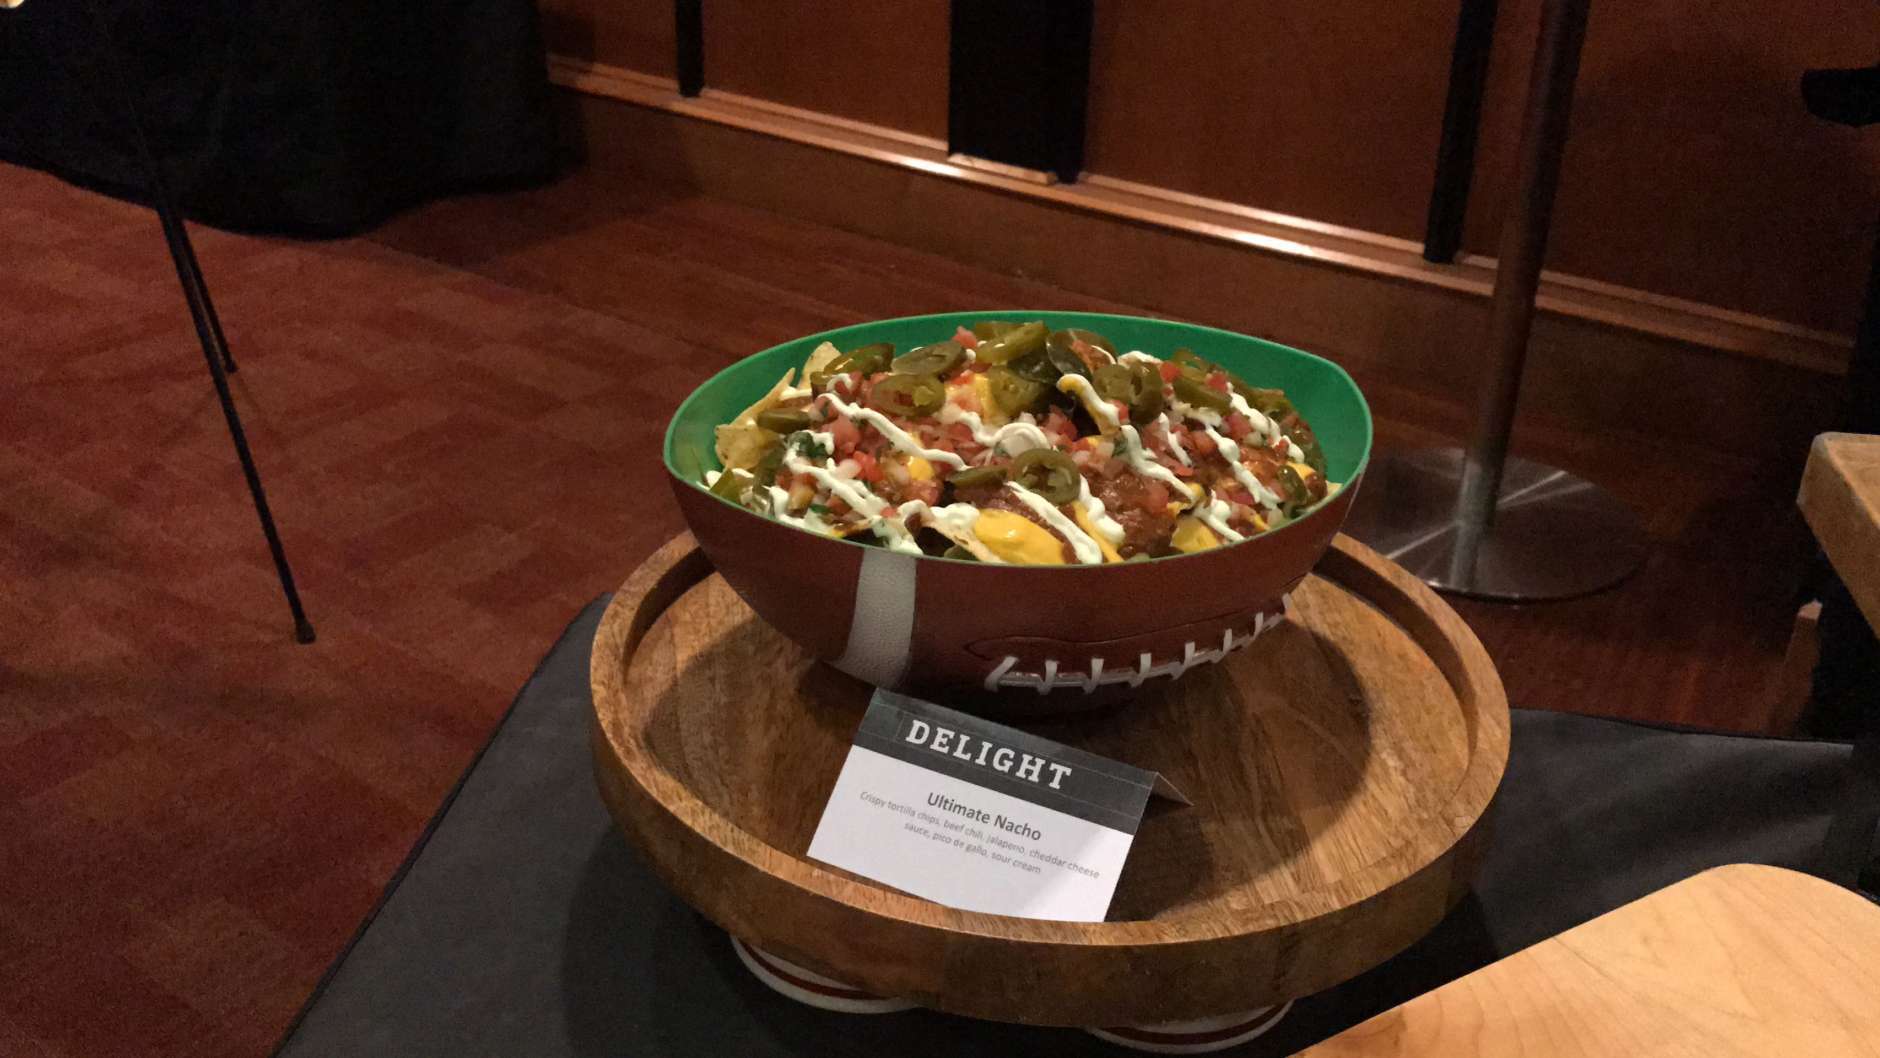 Looking for a more traditional snack? Grab a giant bowl of Ultimate Nachos to feed your friends...or just keep it for yourself. (WTOP/Ginger Whitaker)